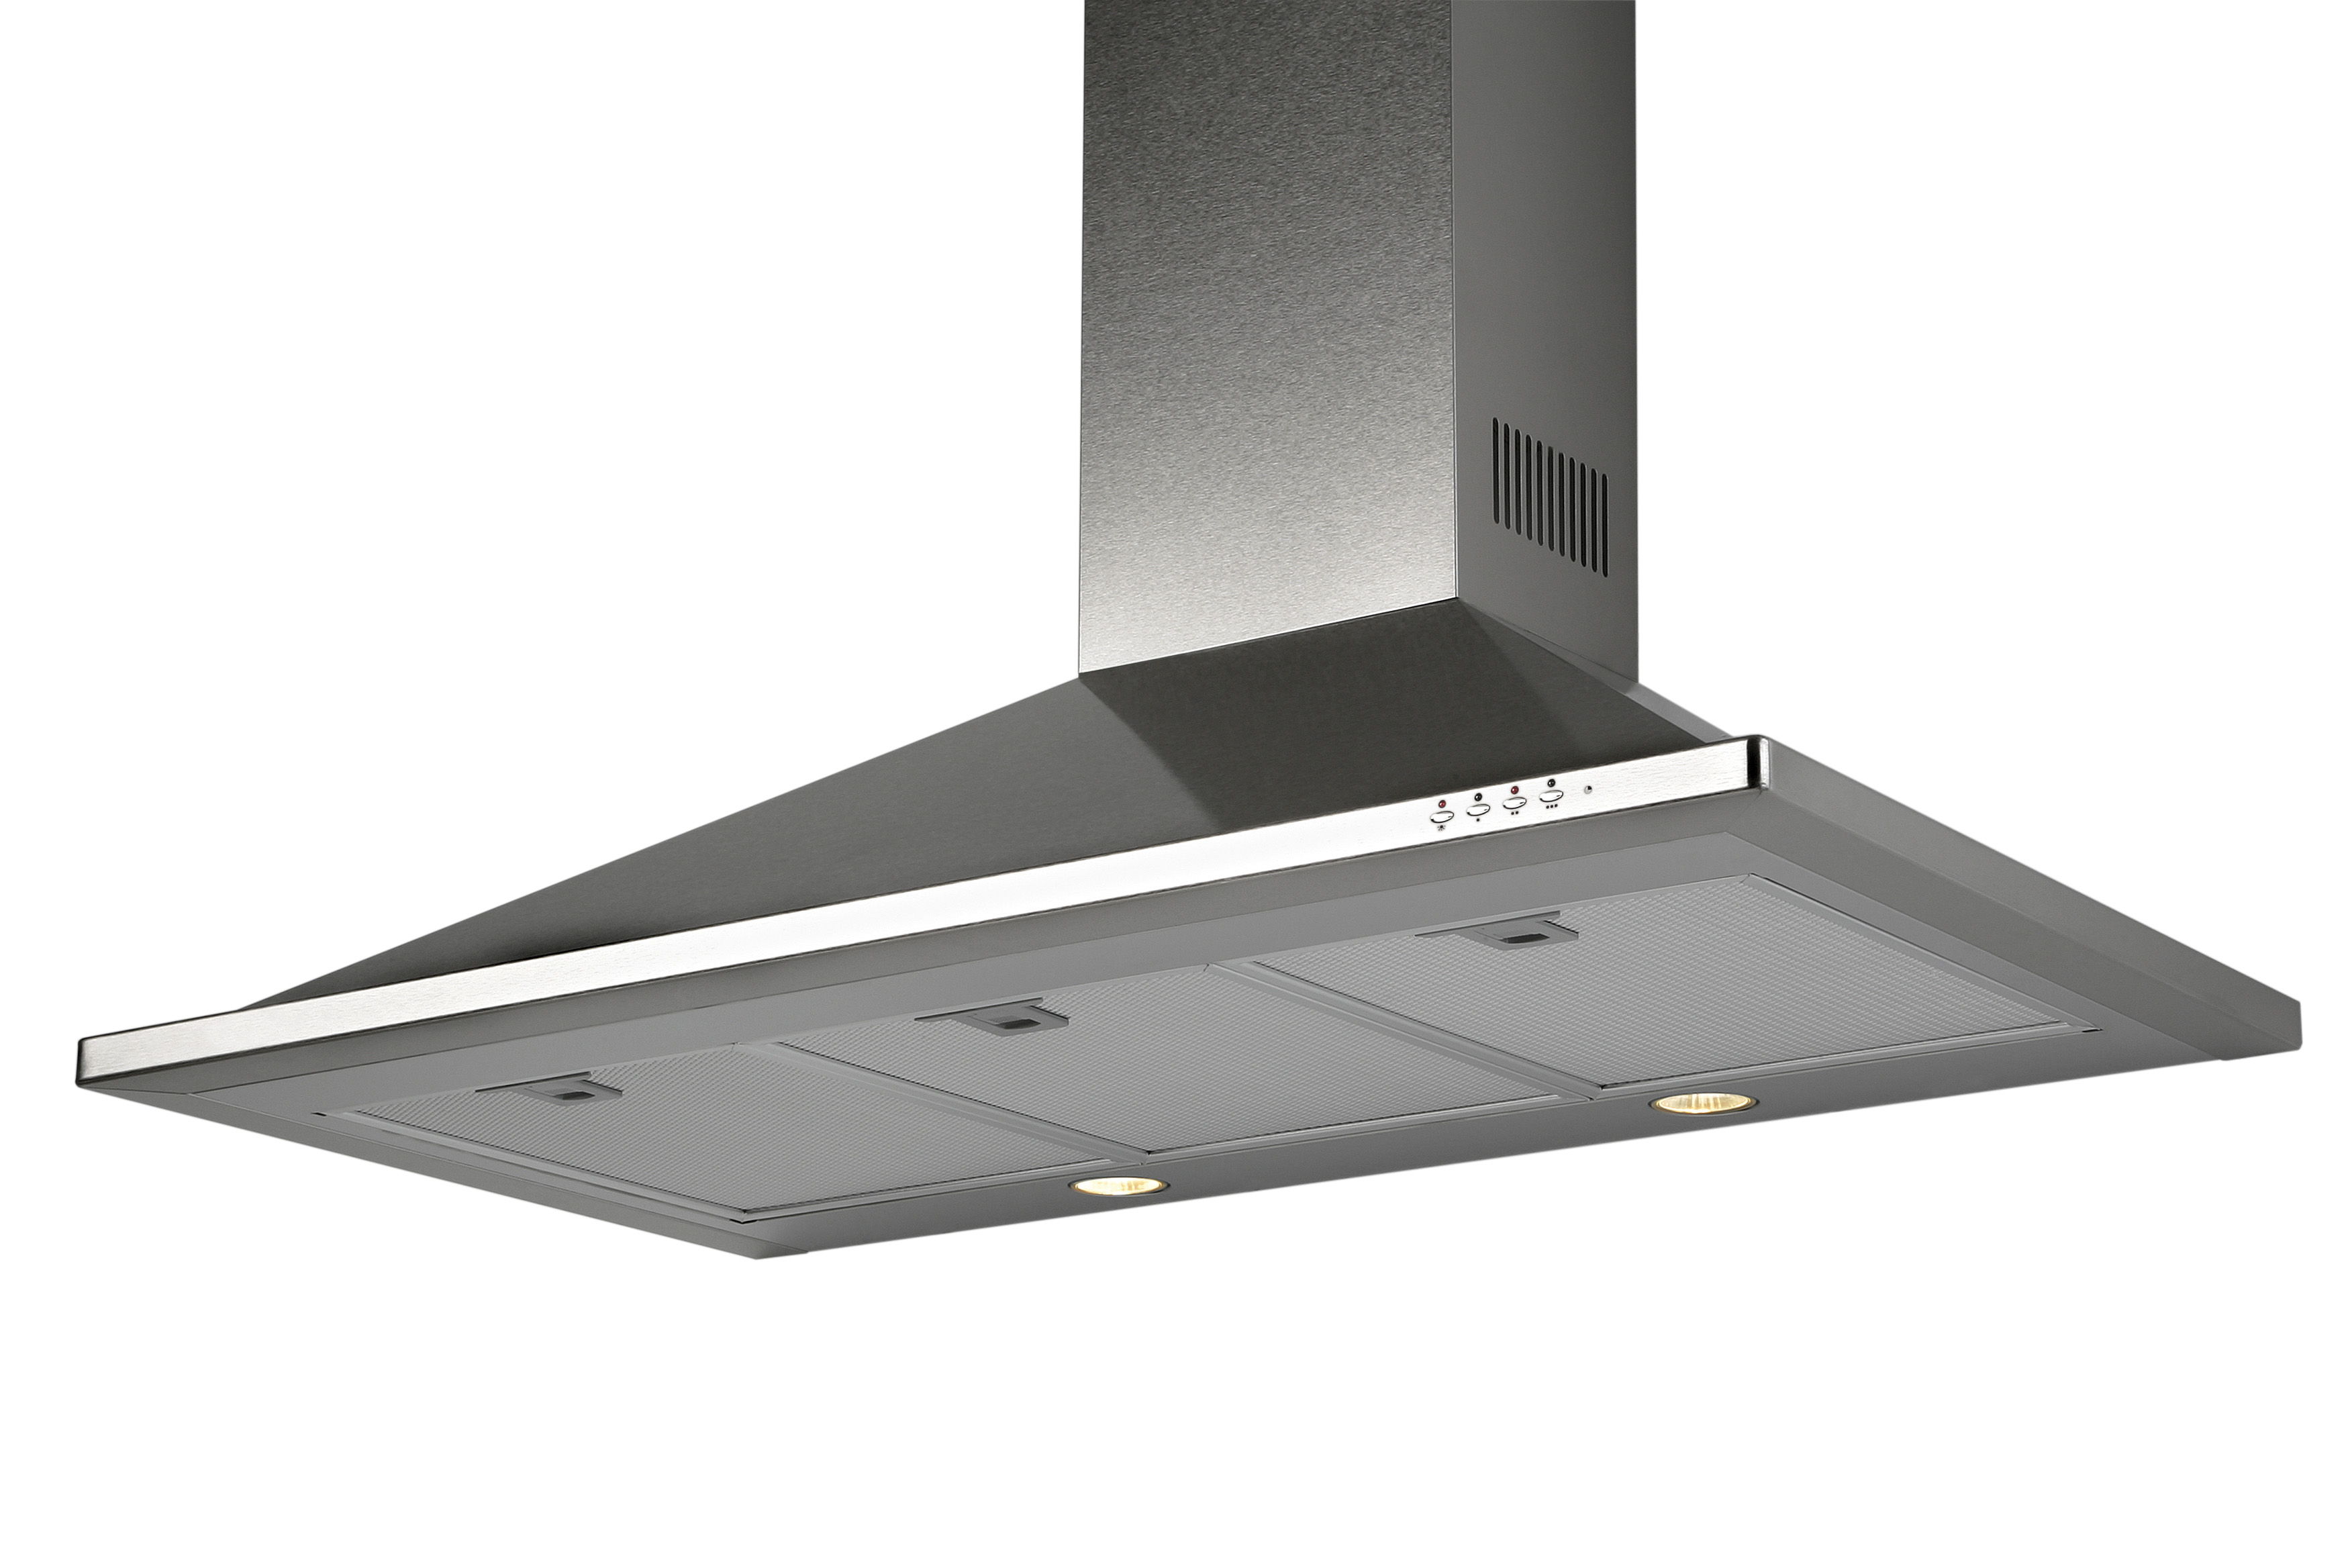 Equator TR 36 Trapezoidal Wall Mounted Rangehood with LED lights in Stainless. Made in Europe